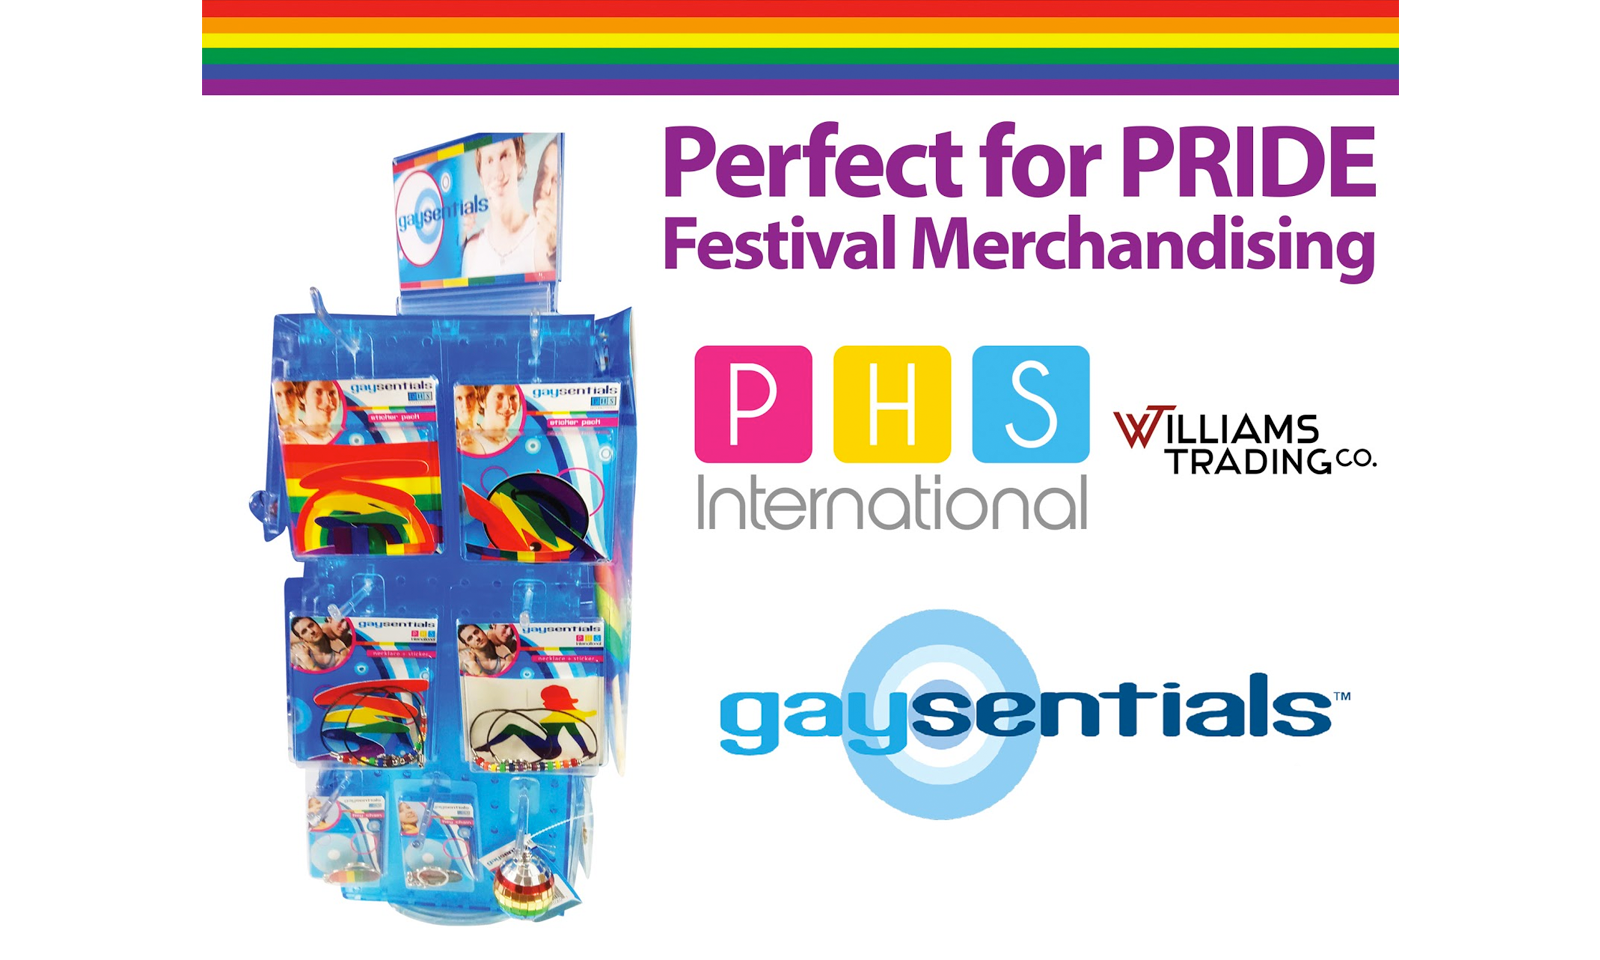 Williams Trading Offers Gaysentials Pride Spinner Rack